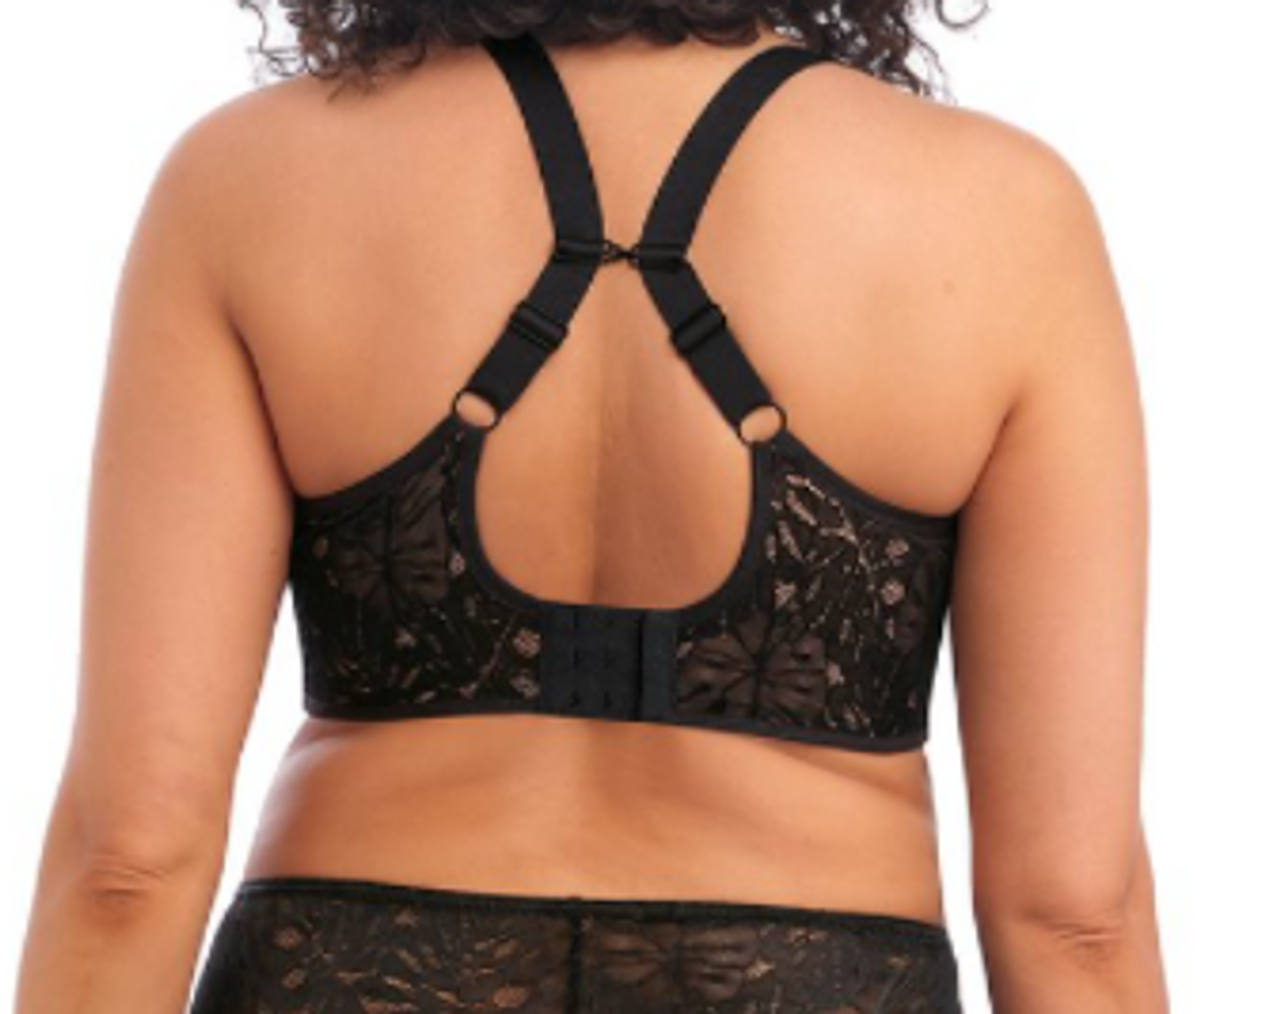 Delta Black 36A Bra Size undefined - $7 - From Emily